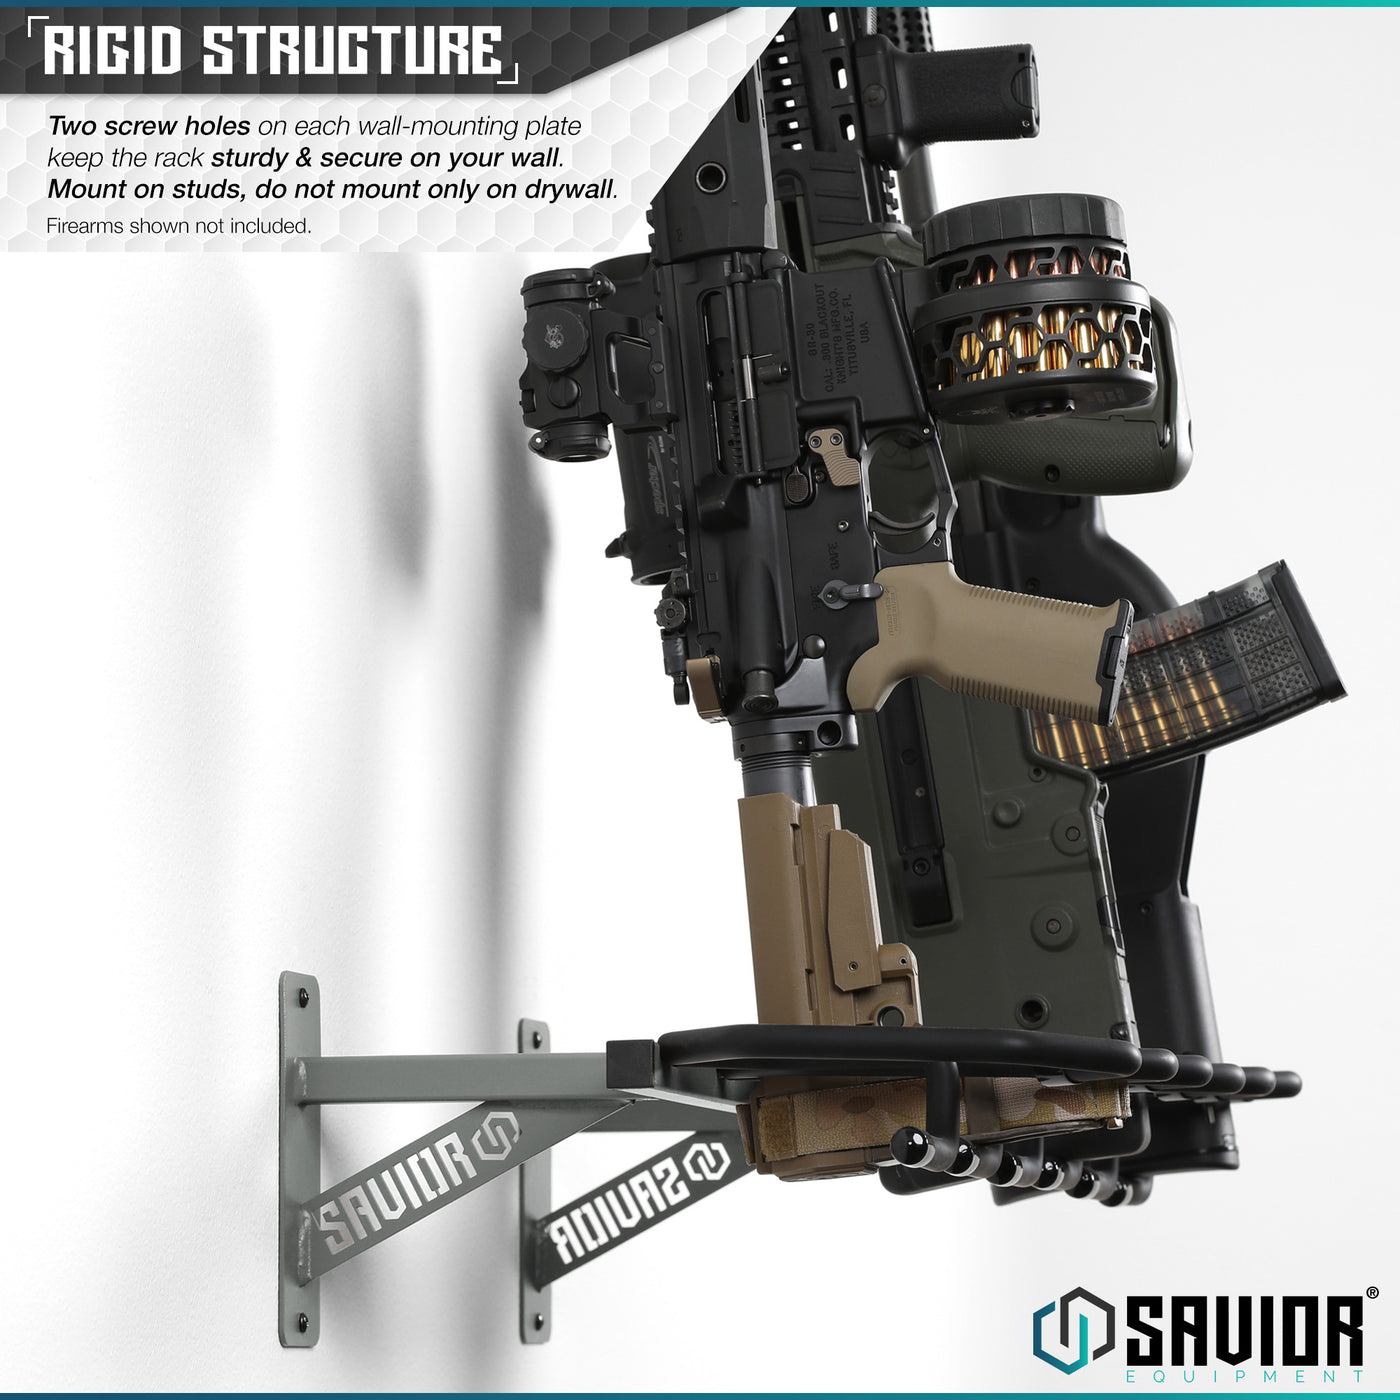 Rigid Structure - Two screw holes on each wall-mounting plate keep the rack sturdy & secure on your wall.Mount on studs, do not mount only on drywall. Firearms shown not included.